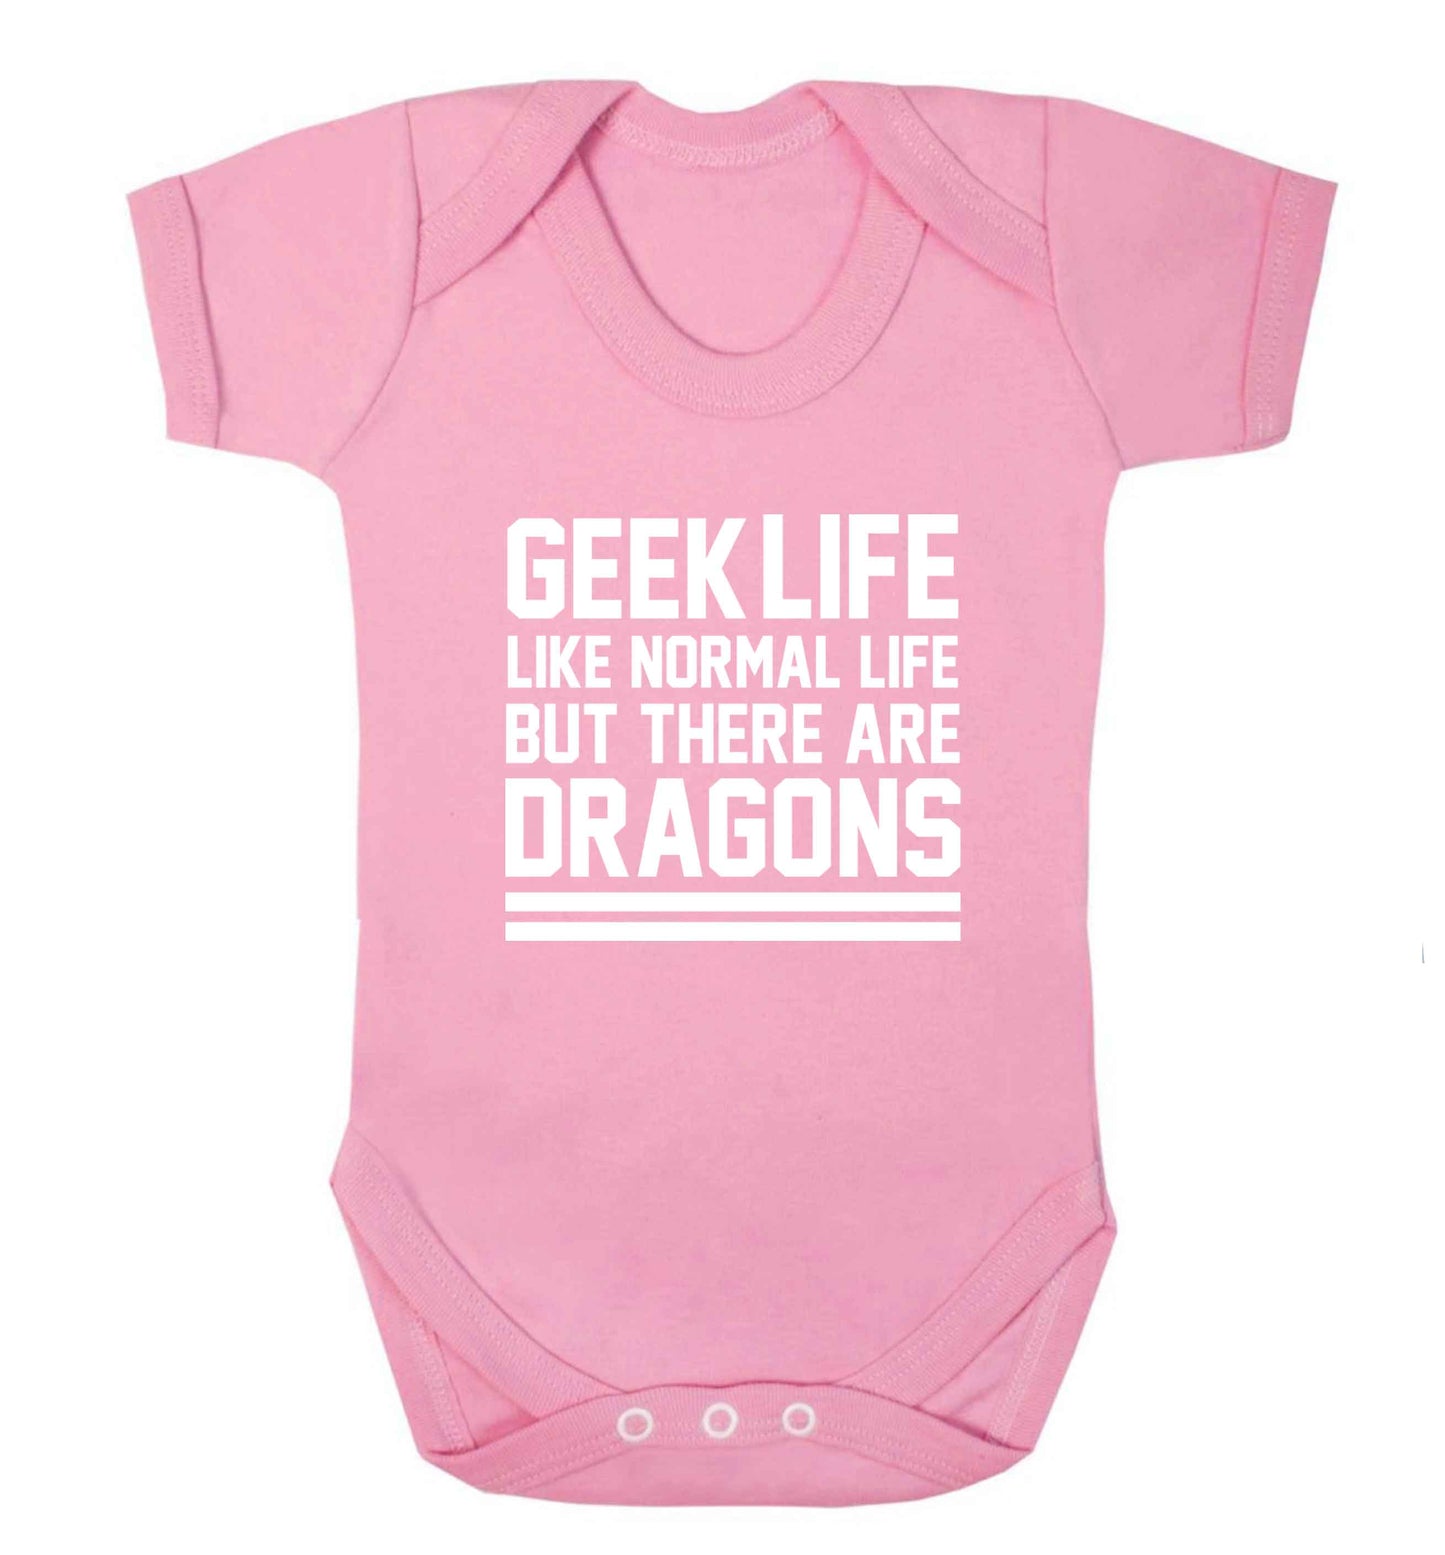 Geek life like normal life but there are dragons baby vest pale pink 18-24 months